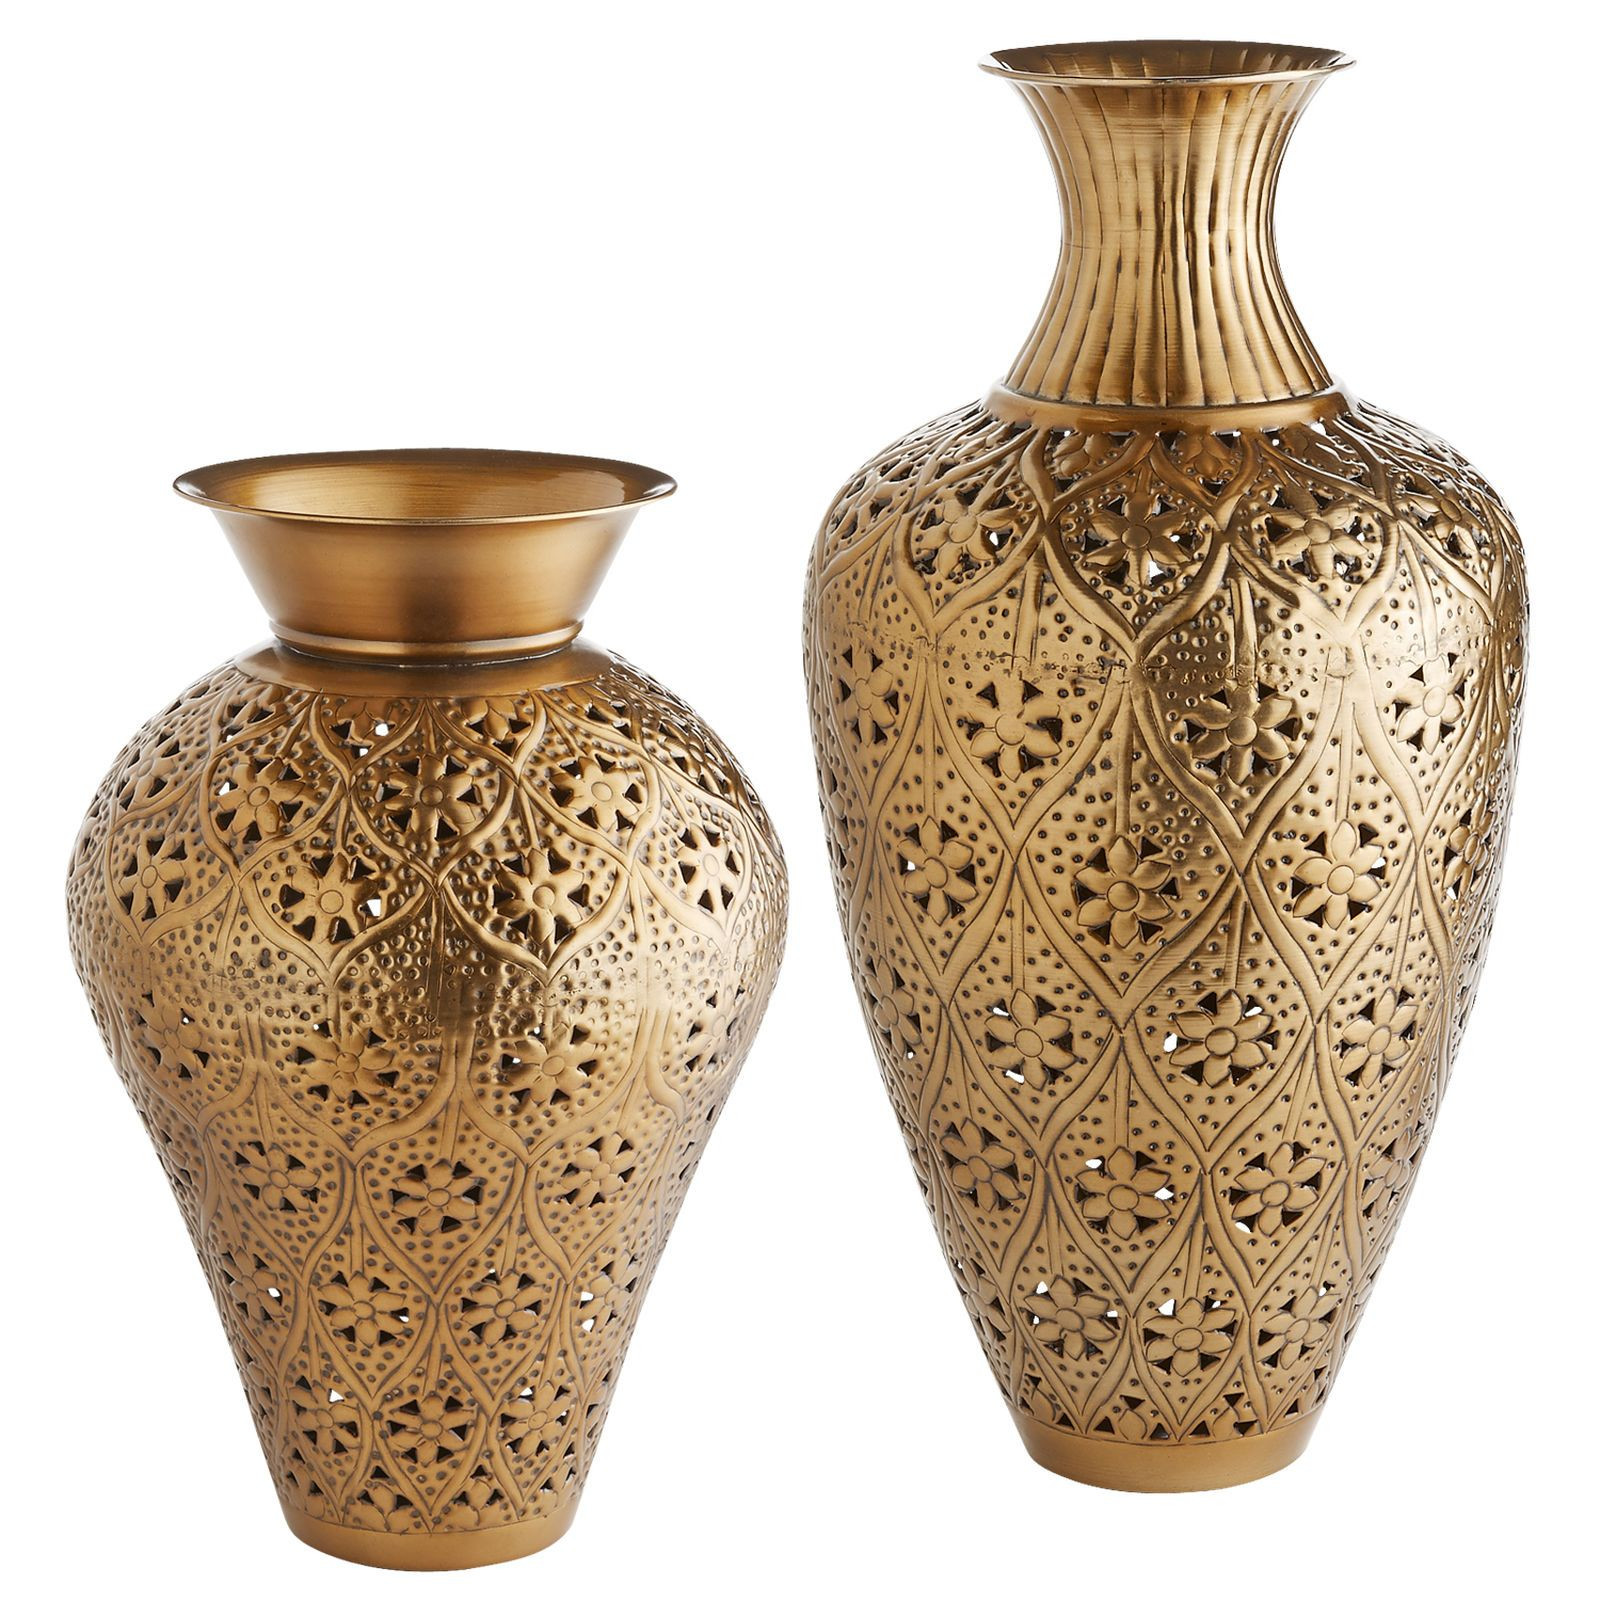 21 Elegant Glass Ginger Vase 2024 free download glass ginger vase of found the perfect additions to your diverse collection our throughout found the perfect additions to your diverse collection our unconventional vases evoke that bohemian